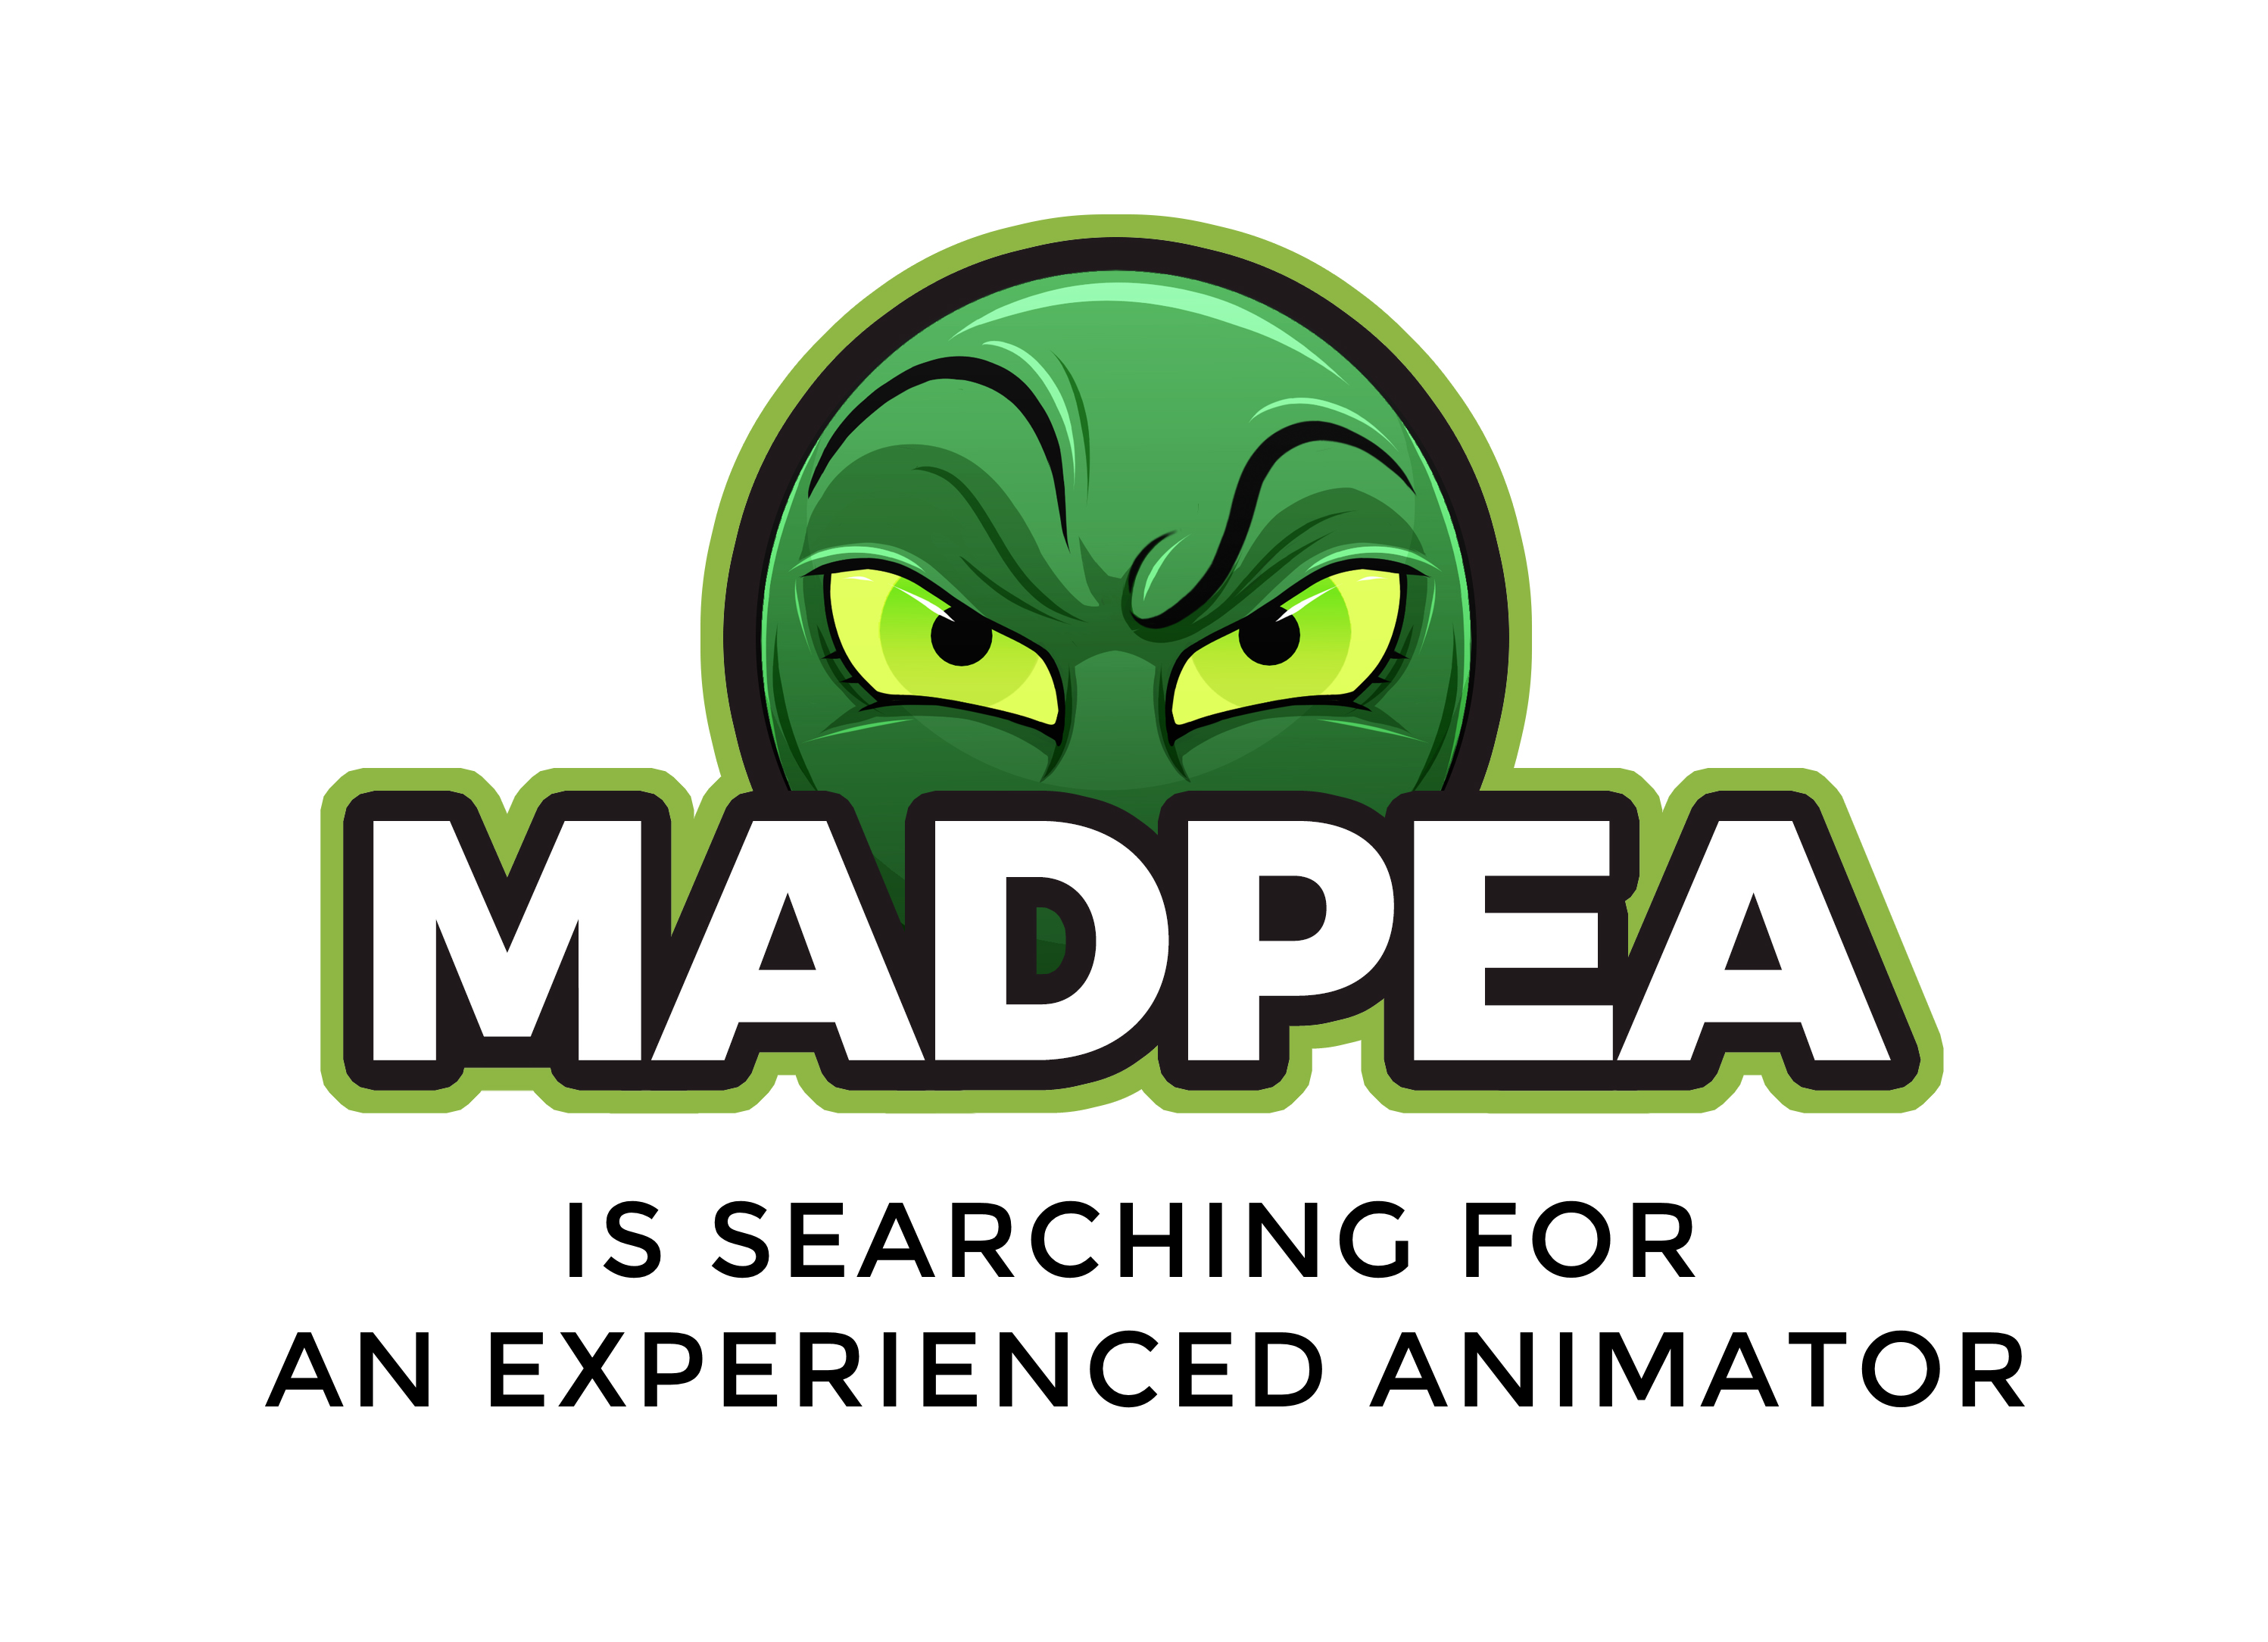 MadPea Is Searching For An Experienced Animator